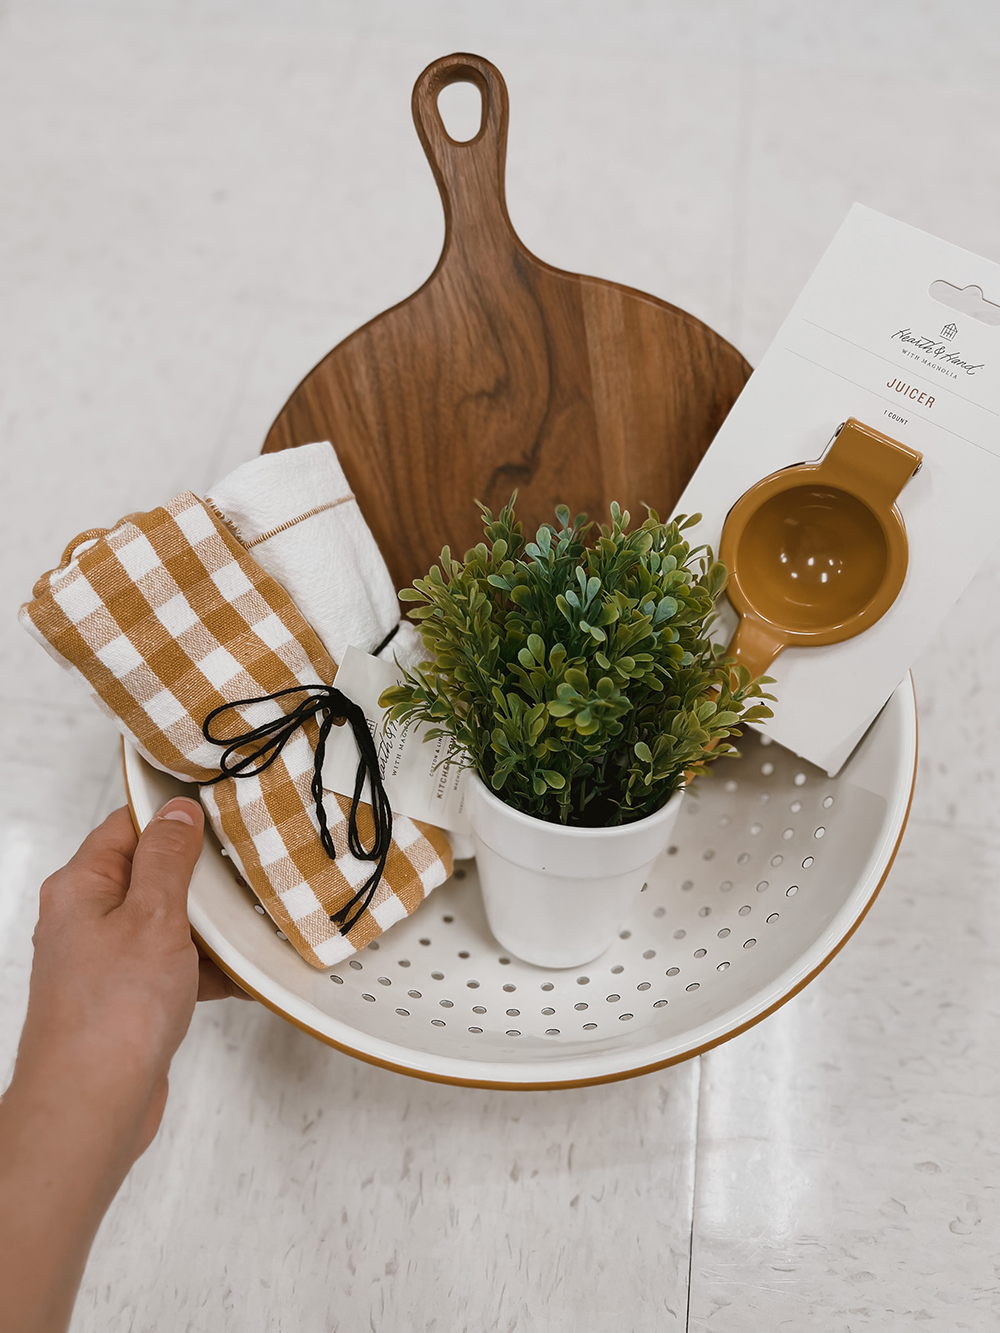 Needing a last-minute gift idea for Mother's Day? I am sharing my favorite hack for simple yet thoughtful gift giving at the last minute. Come see what I pulled together in one simple Target shopping trip over on KaraLayne.com!